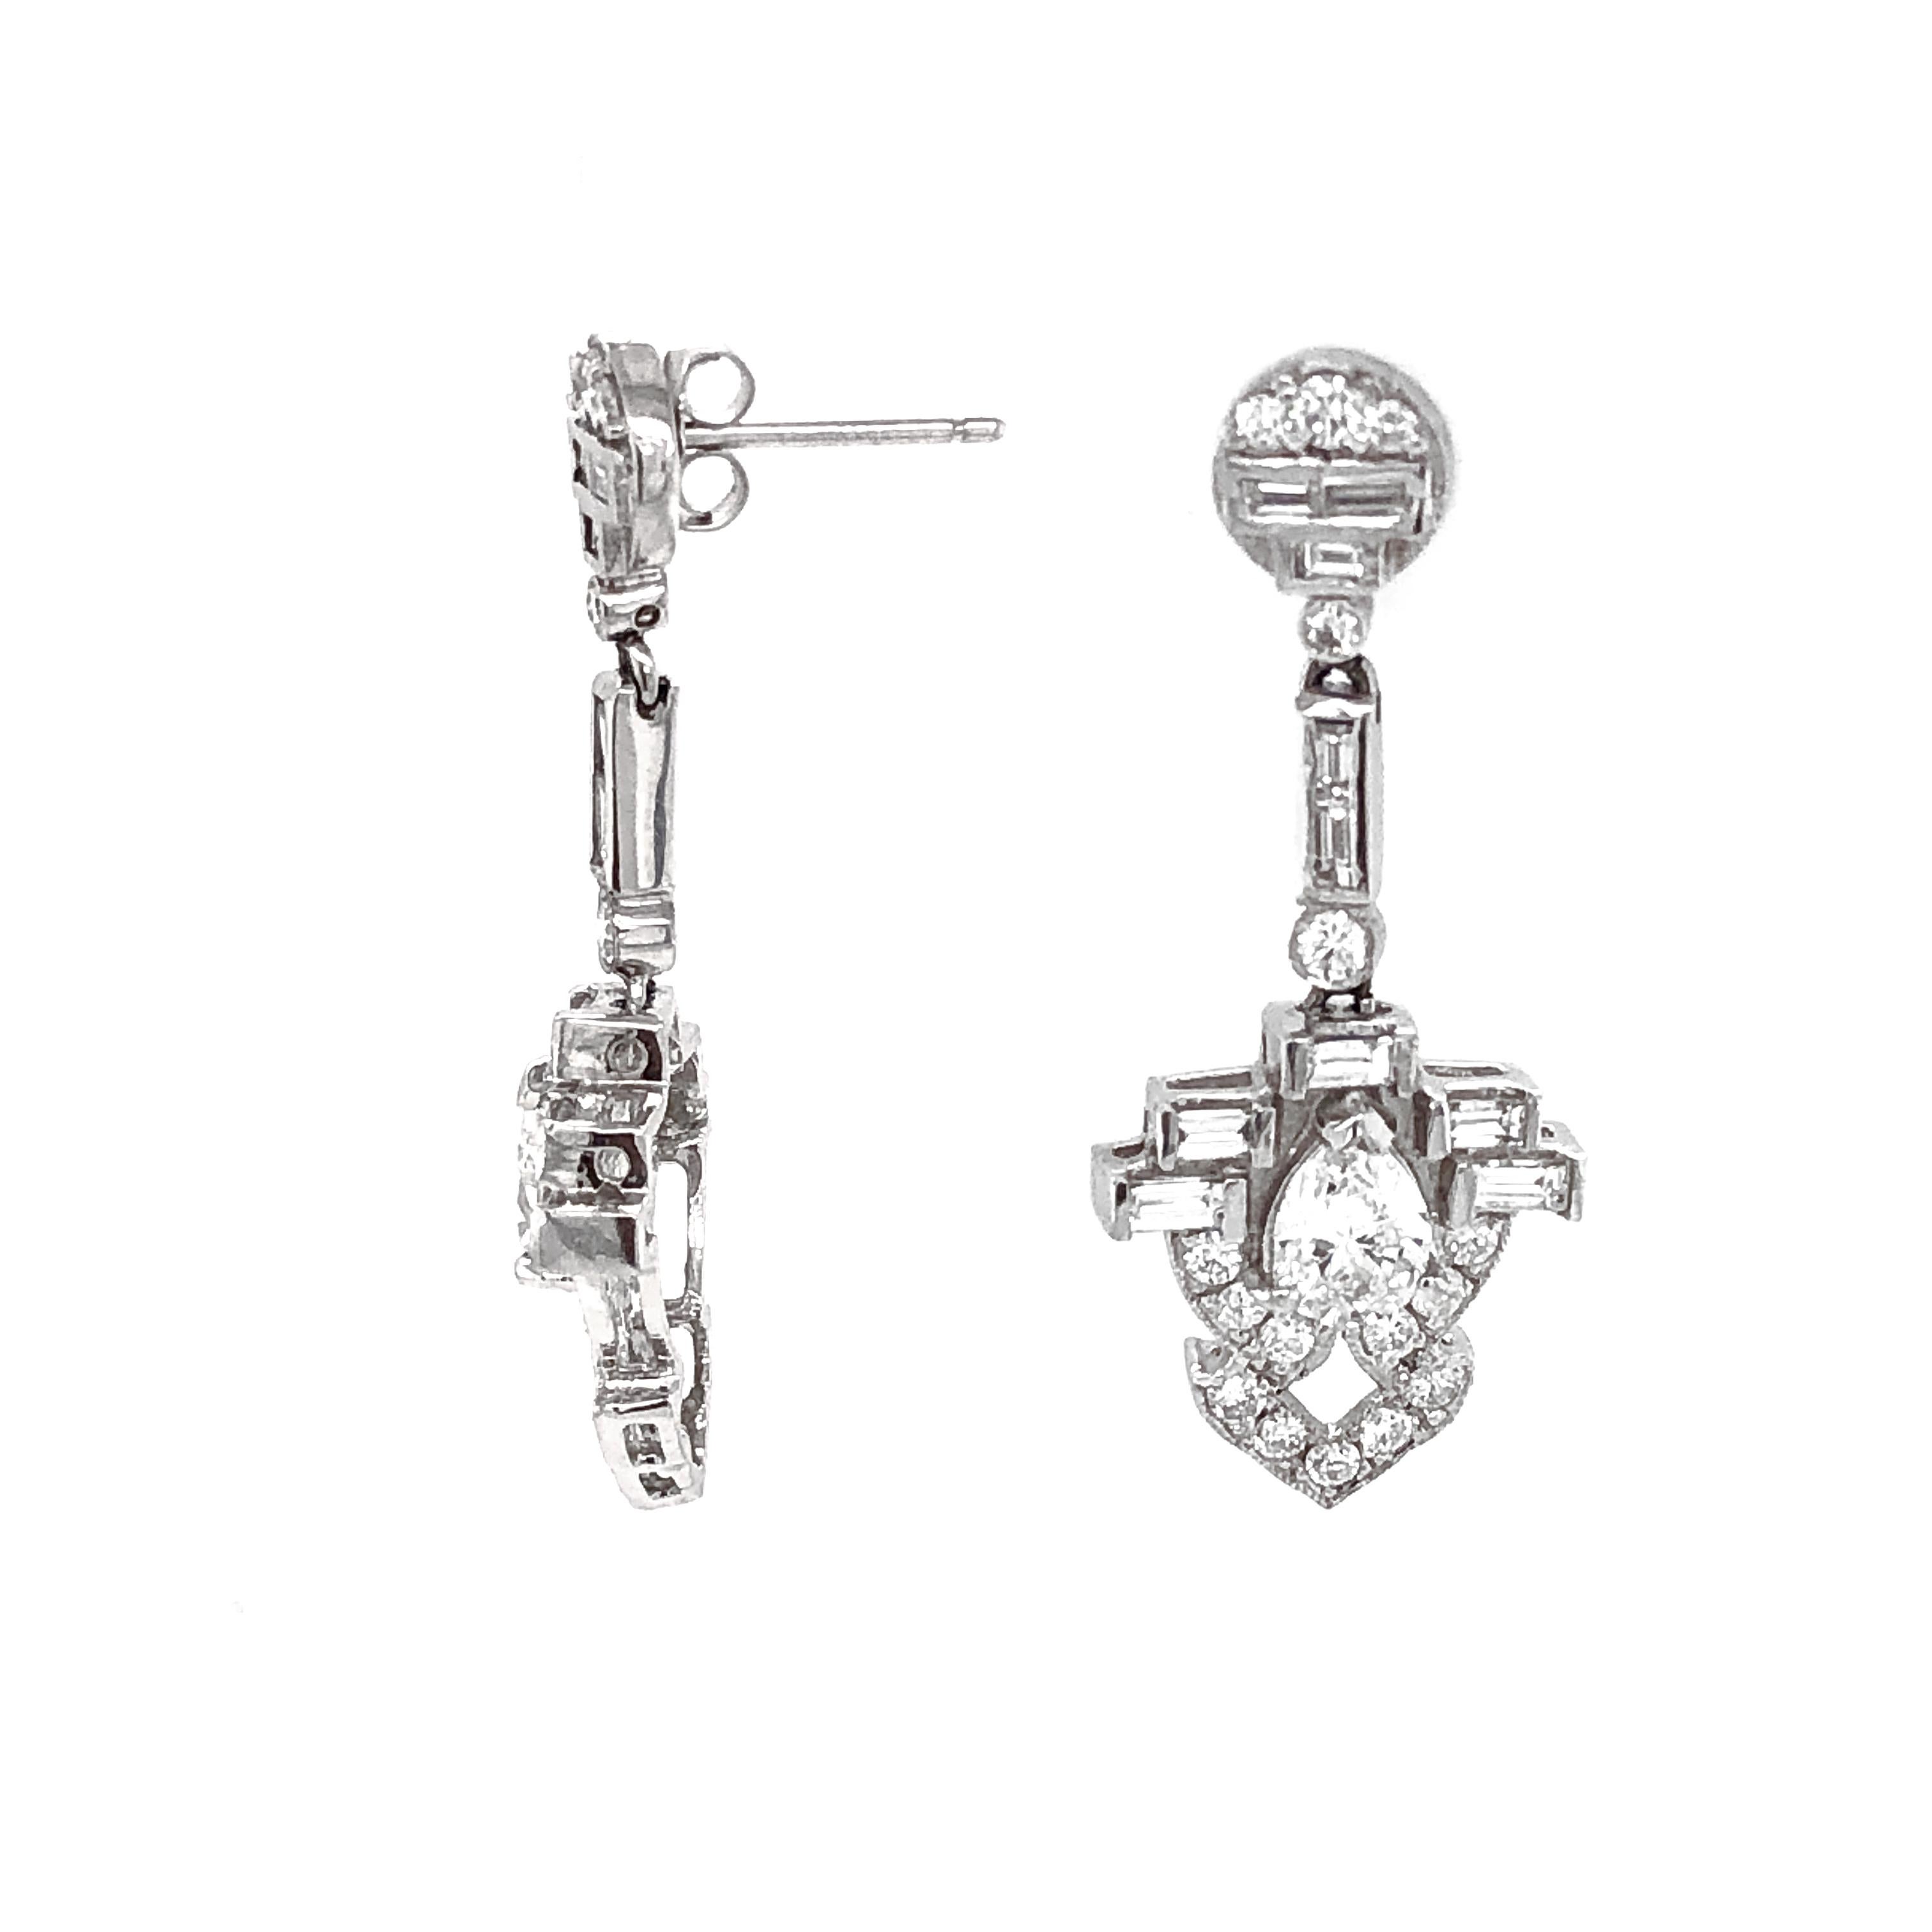 Simple drop diamond platinum earring with center diamond stone in pear cut and accented with smaller round diamonds. 
All diamonds in total are 3.39 carat. 
Diamonds are white and natural and in G-H Color Clarity VS.
Platinum 950.
Butterfly